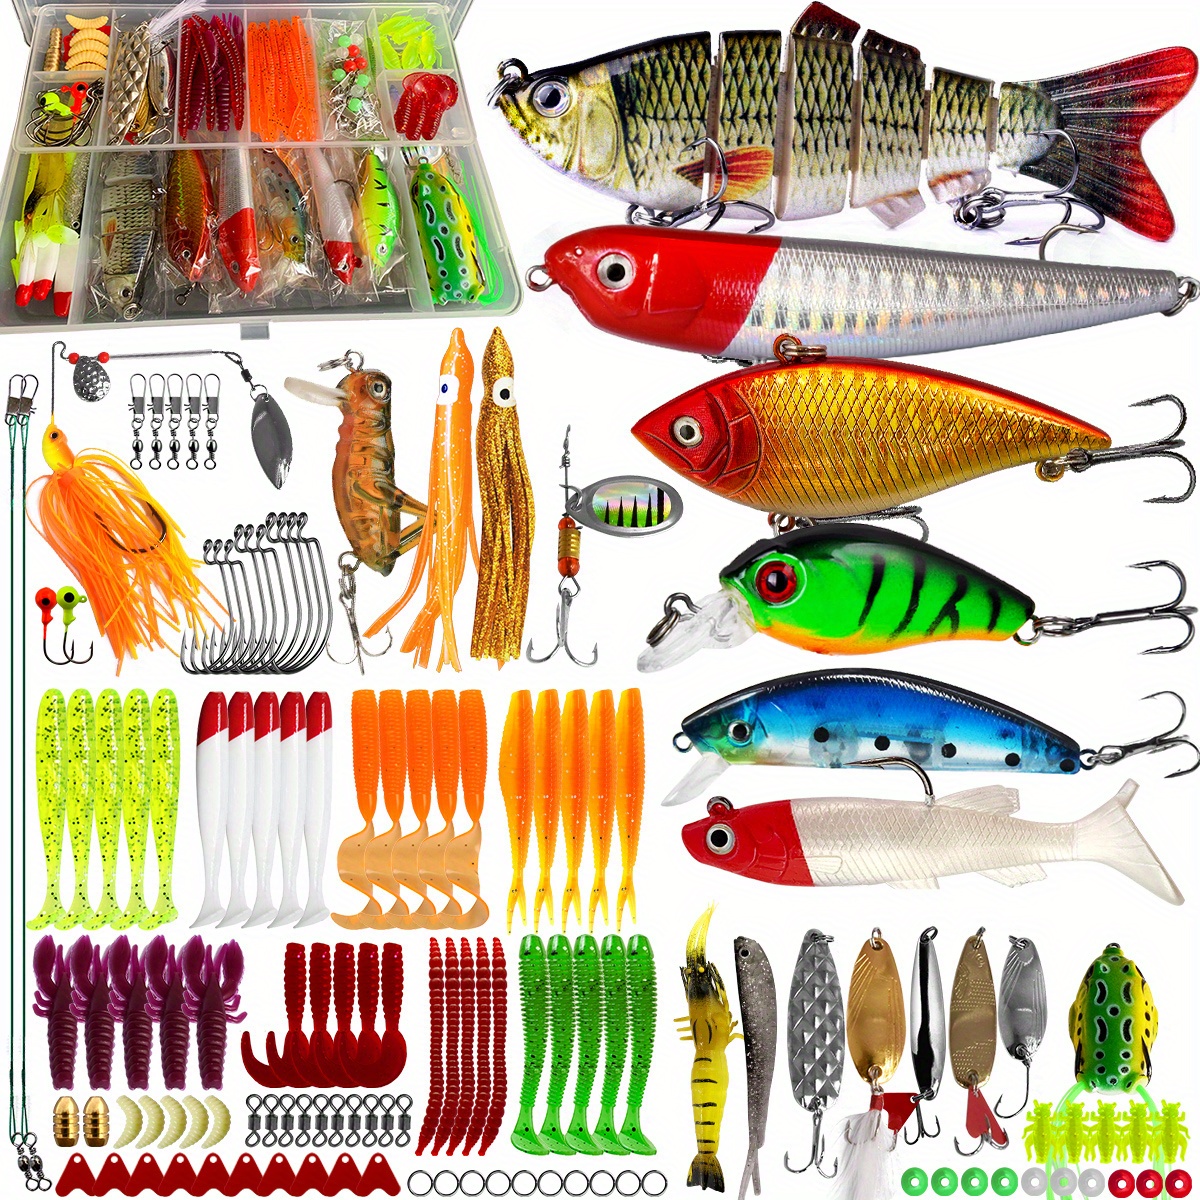  Tailored Tackle Trout Stream Fishing Kit Tackle Box with Tackle  Included, Tail Spinners Jerkbait Lure Crankbait Lures Jigs Bait Hooks  Spoons Rooster Spinner Baits